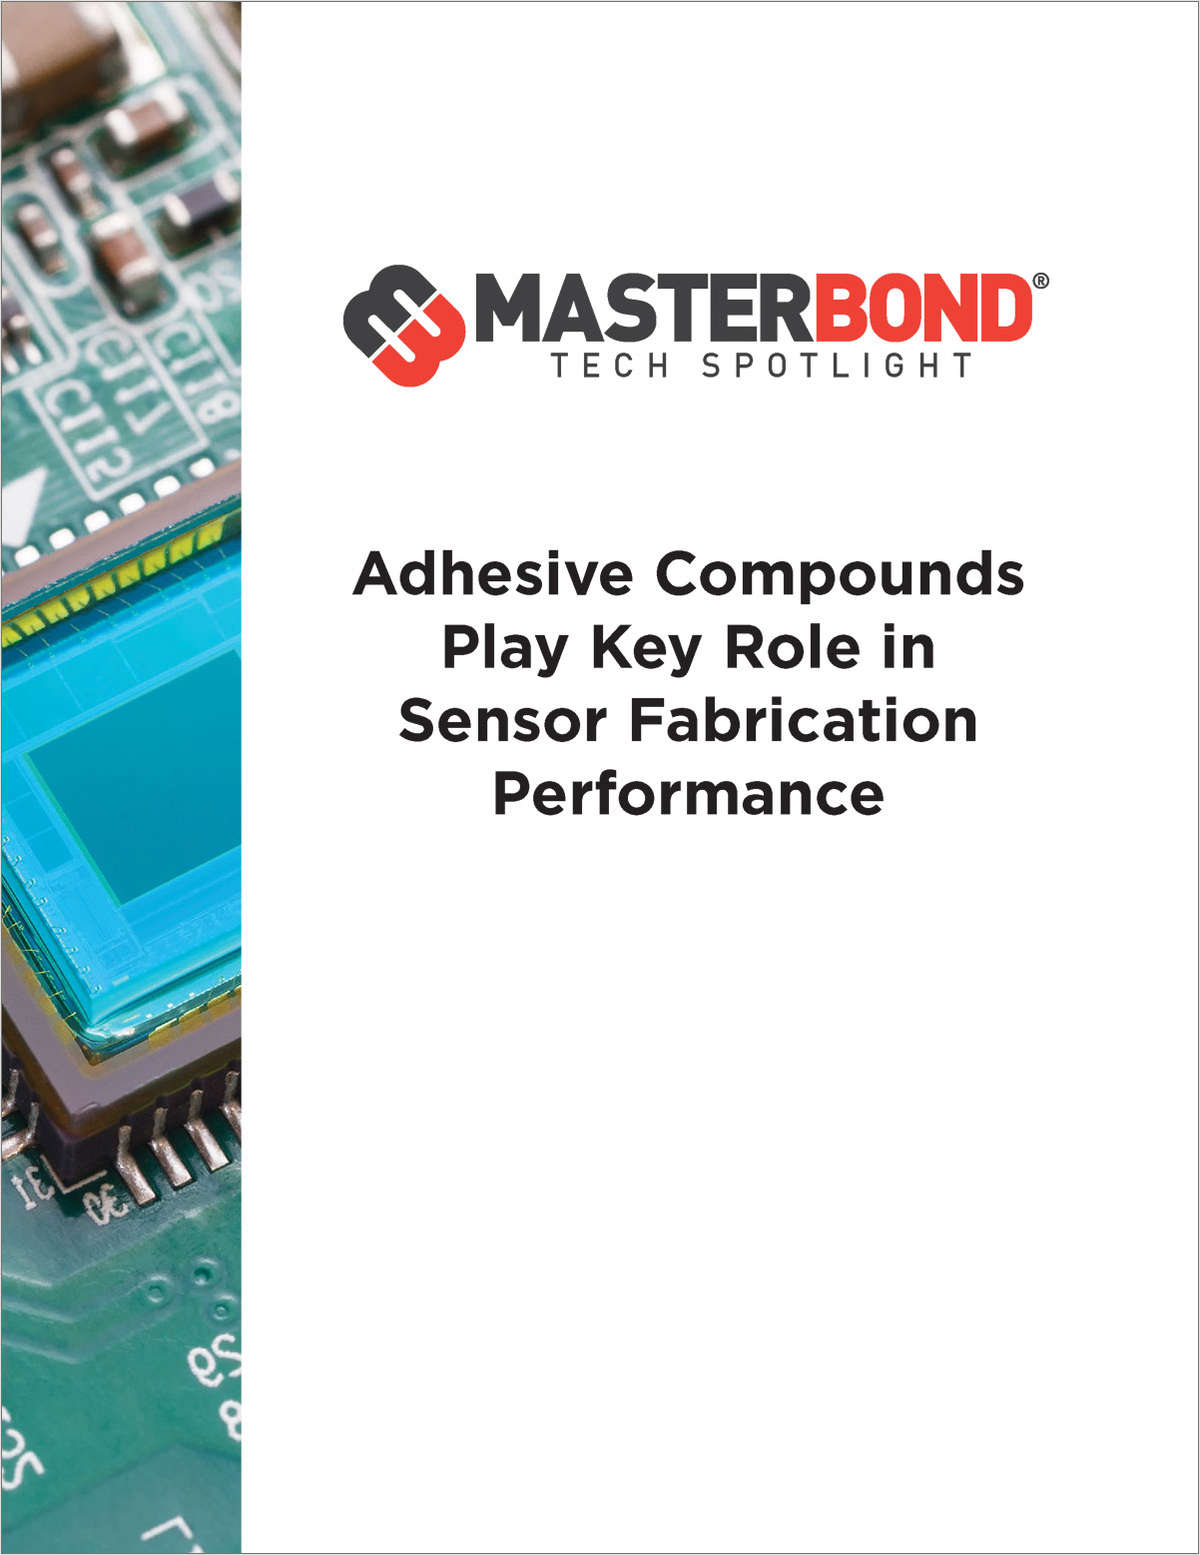 Adhesive Compounds Play Key Role in Sensor Fabrication Performance